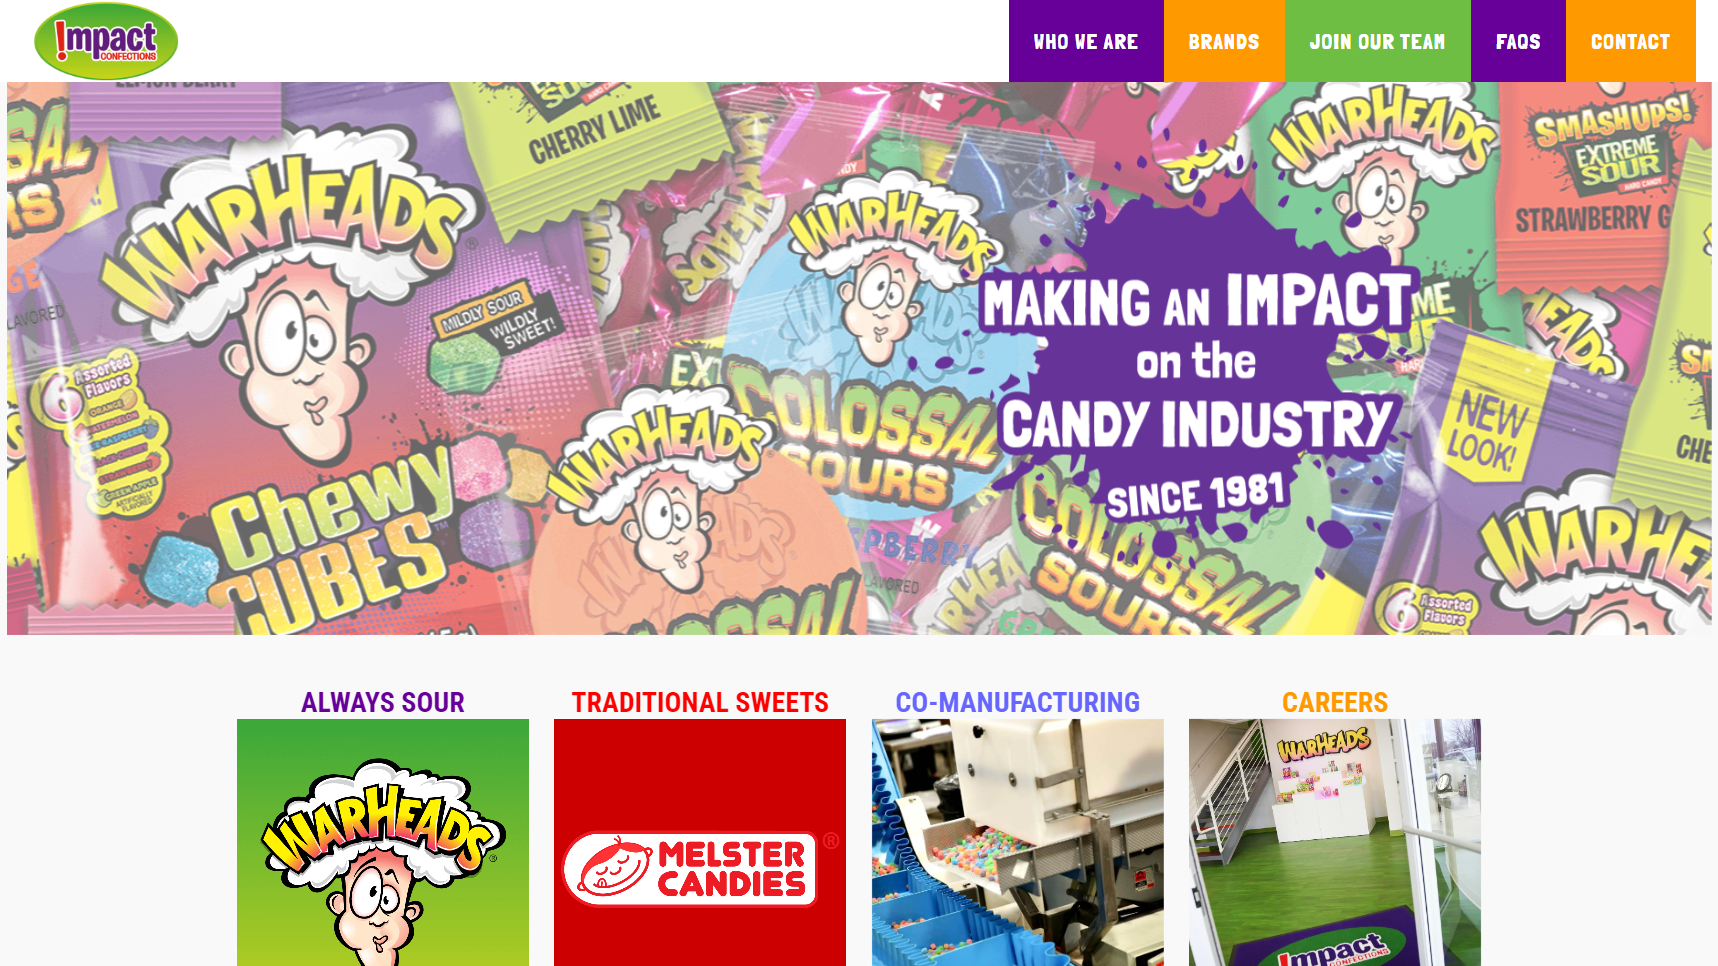 Impact Confections - Candy Manufacturer